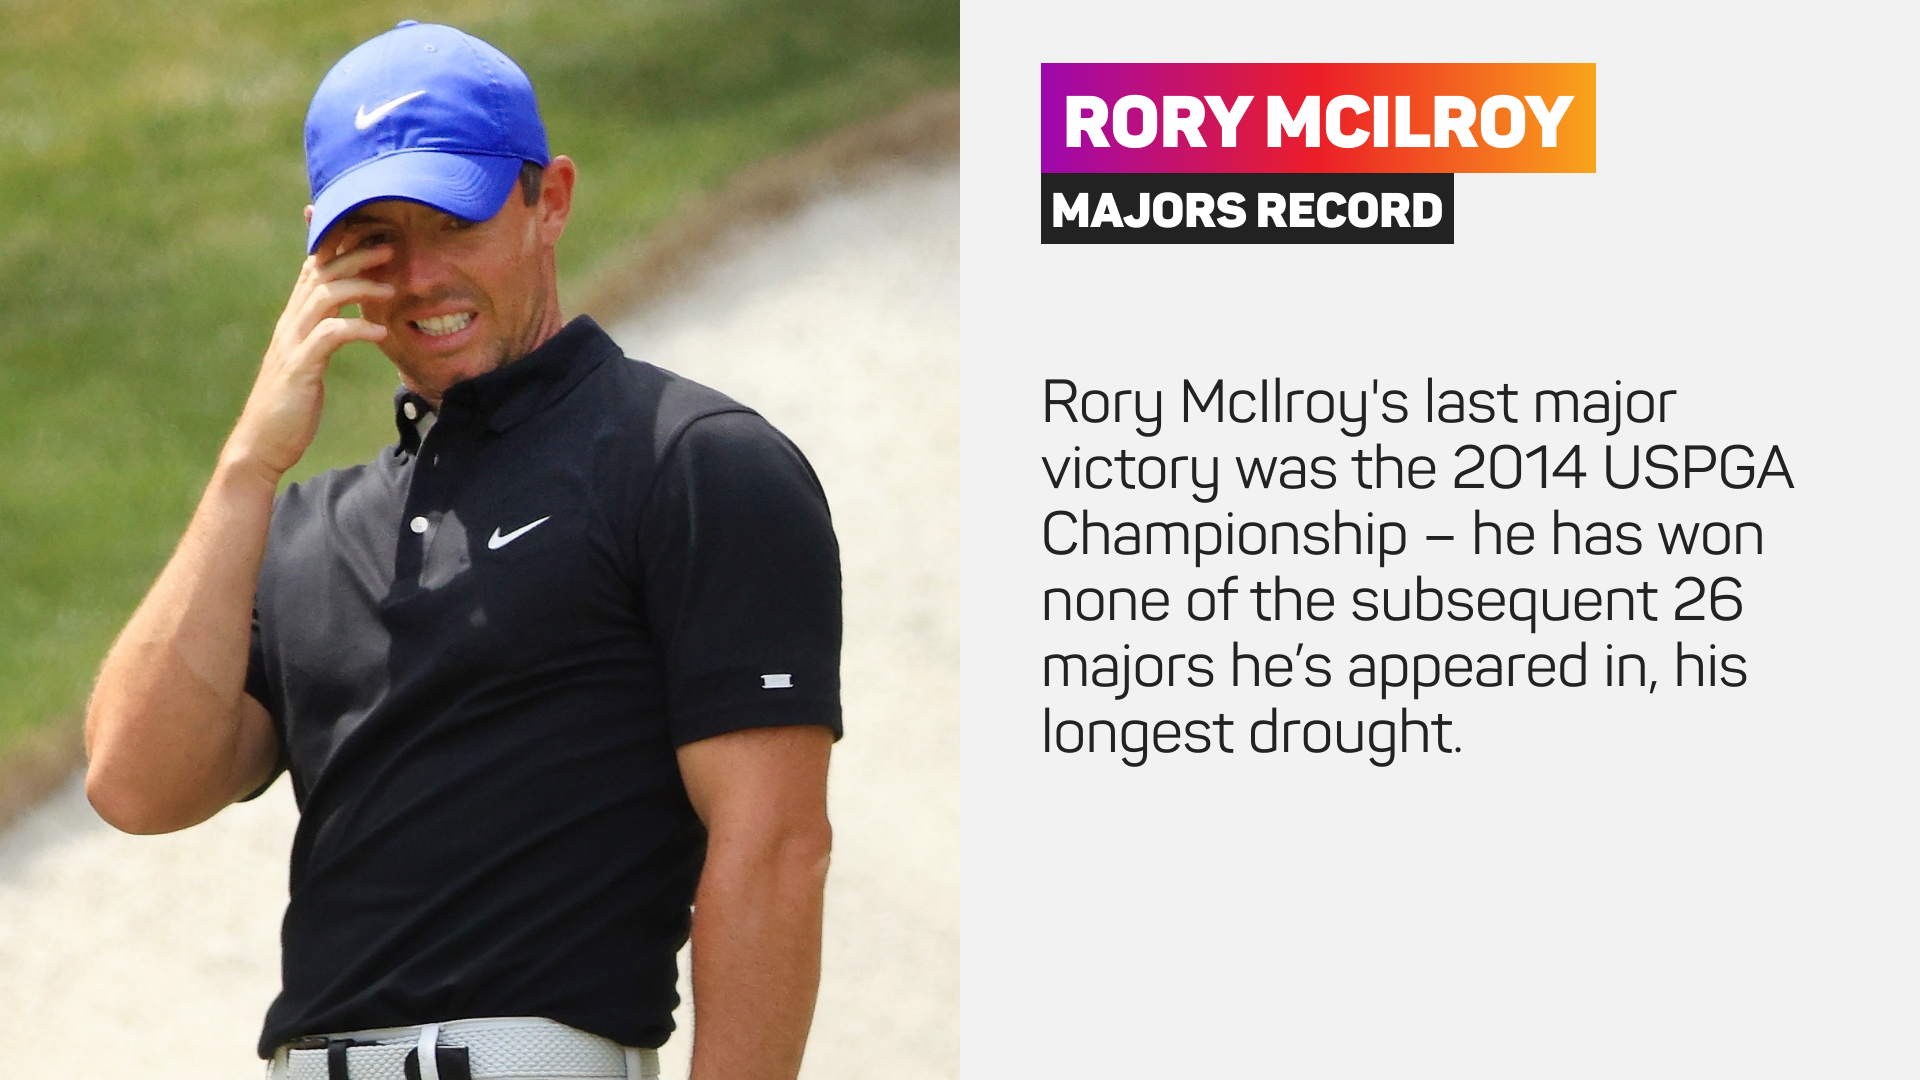 Rory McIlroy is still hunting a career Grand Slam